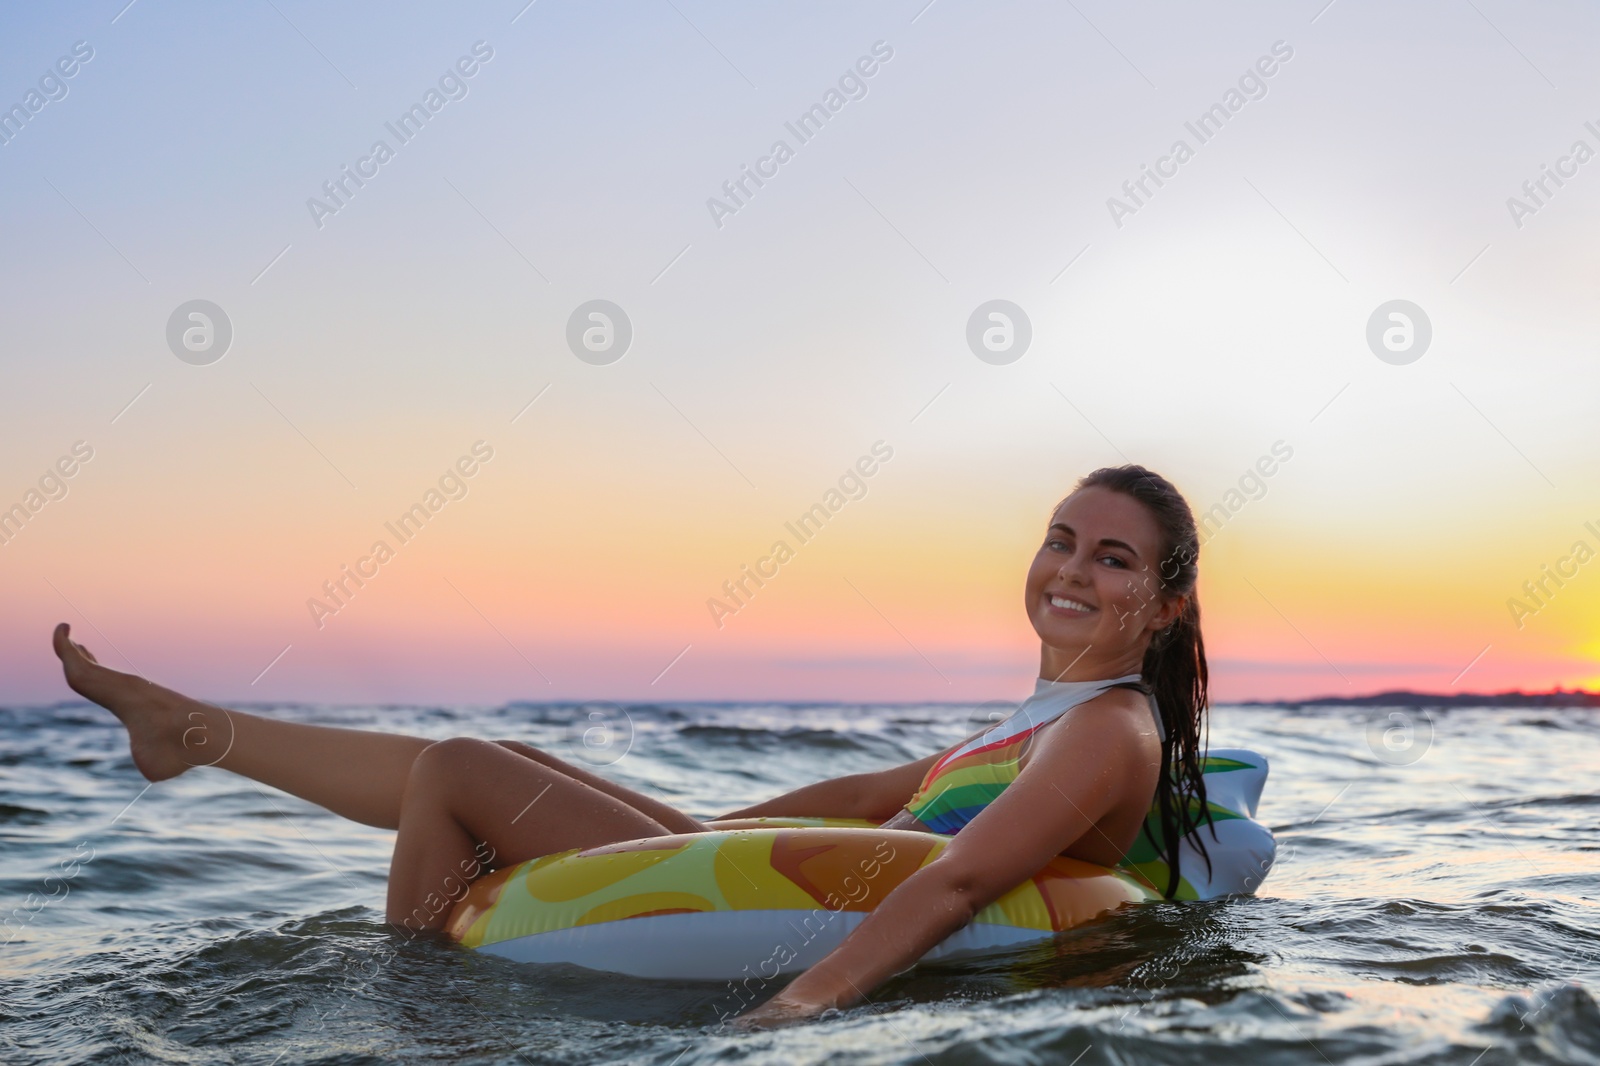 Photo of Young woman on inflatable ring in water